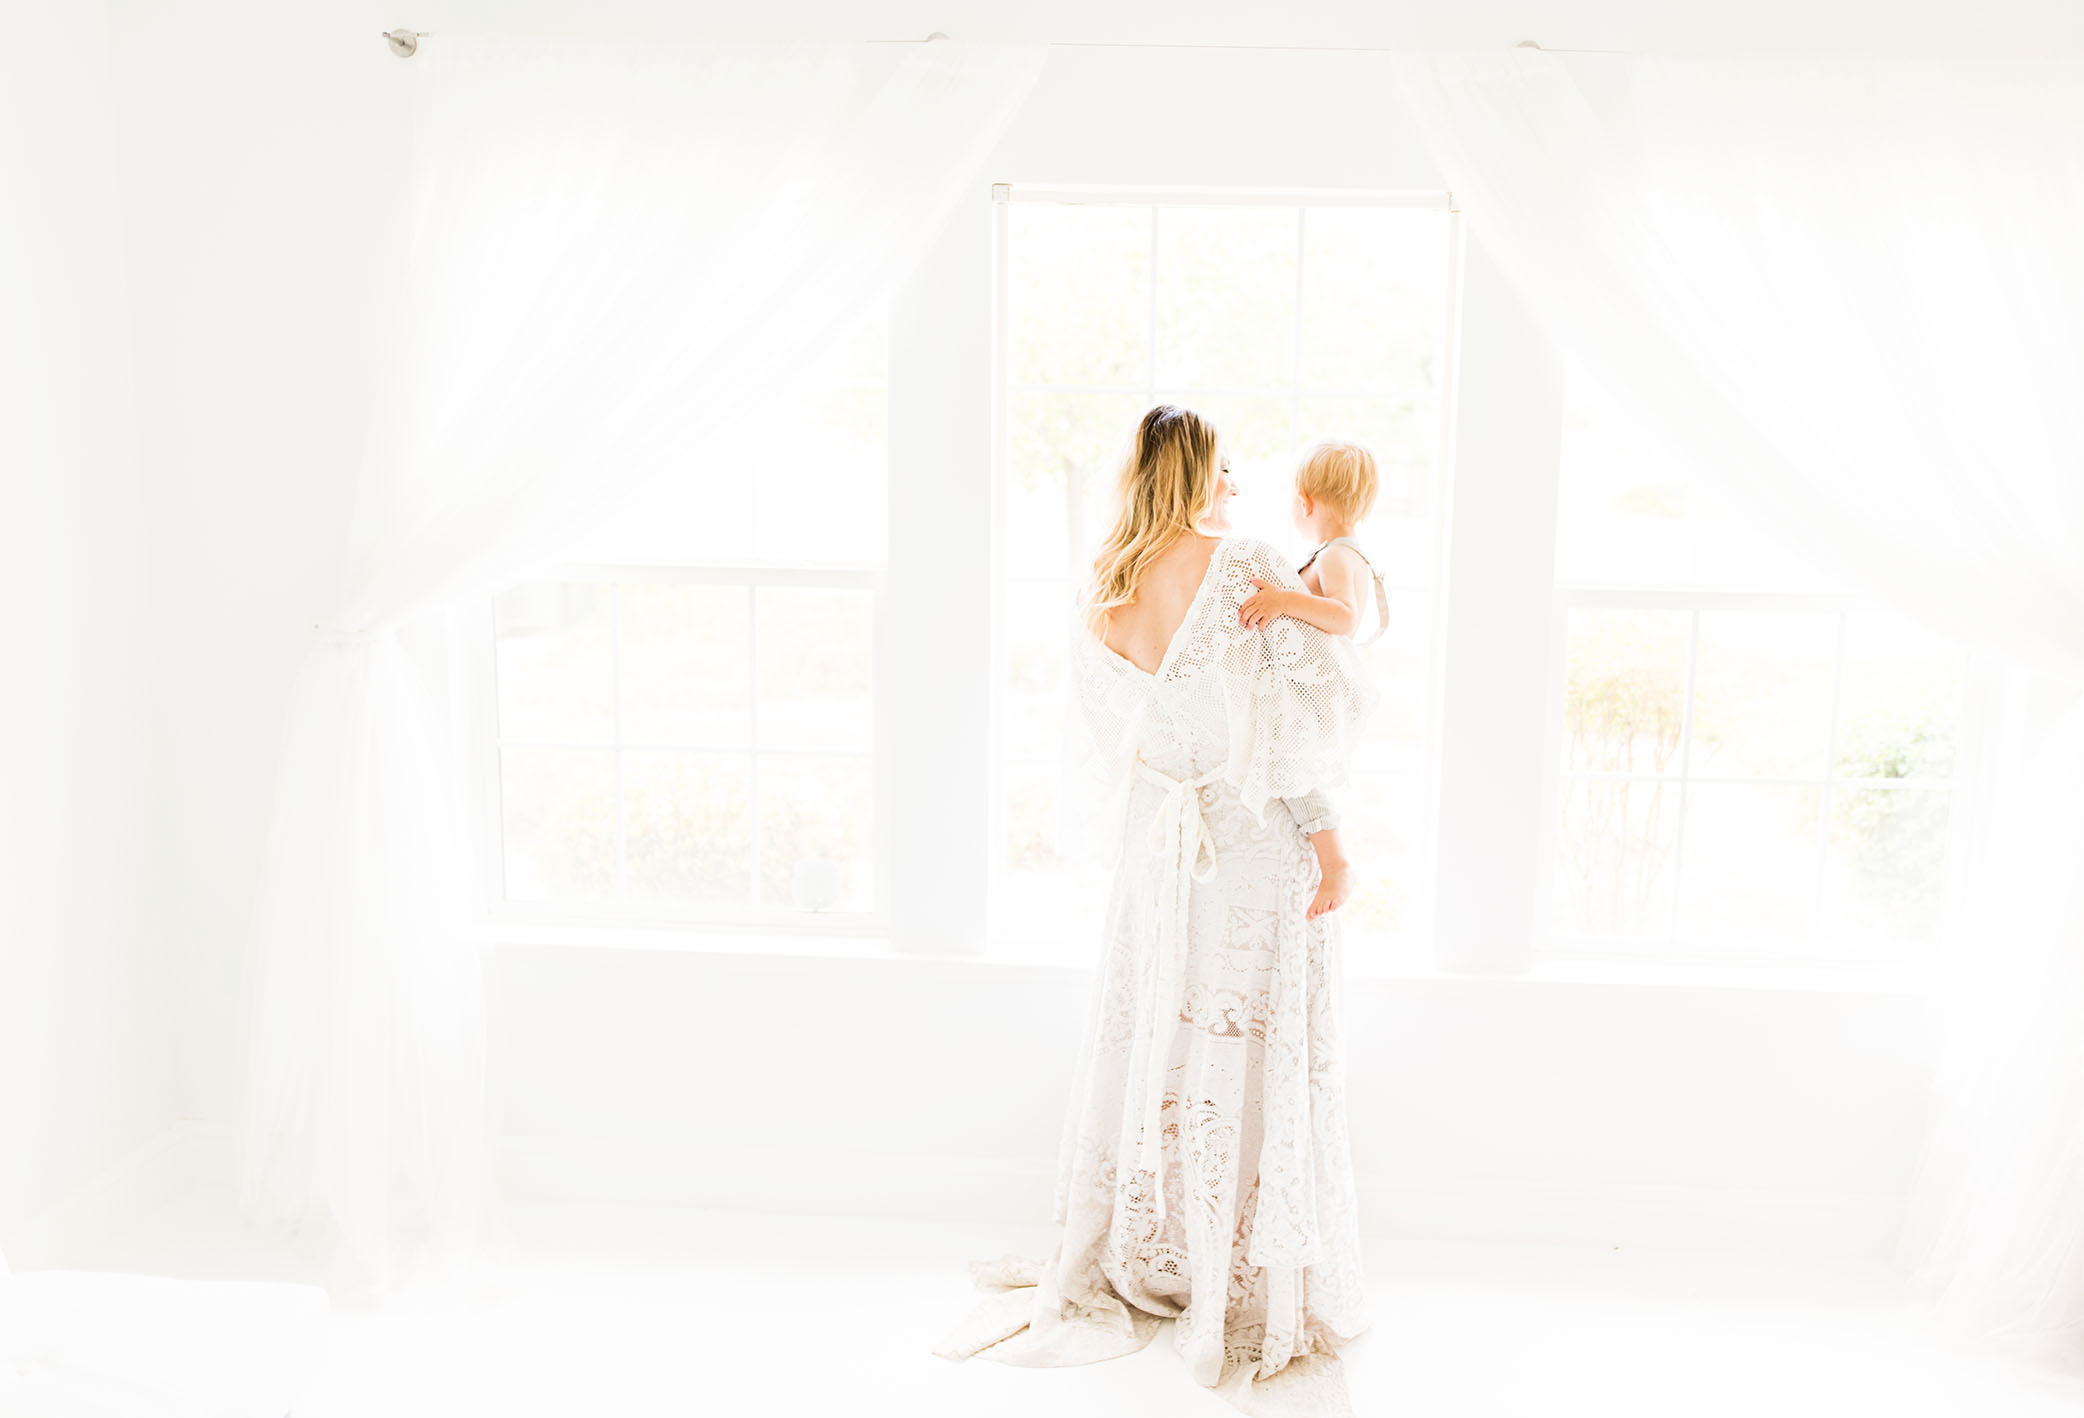 Studio full of light and white captured by Sweet Beginnings Photography by Stephanie